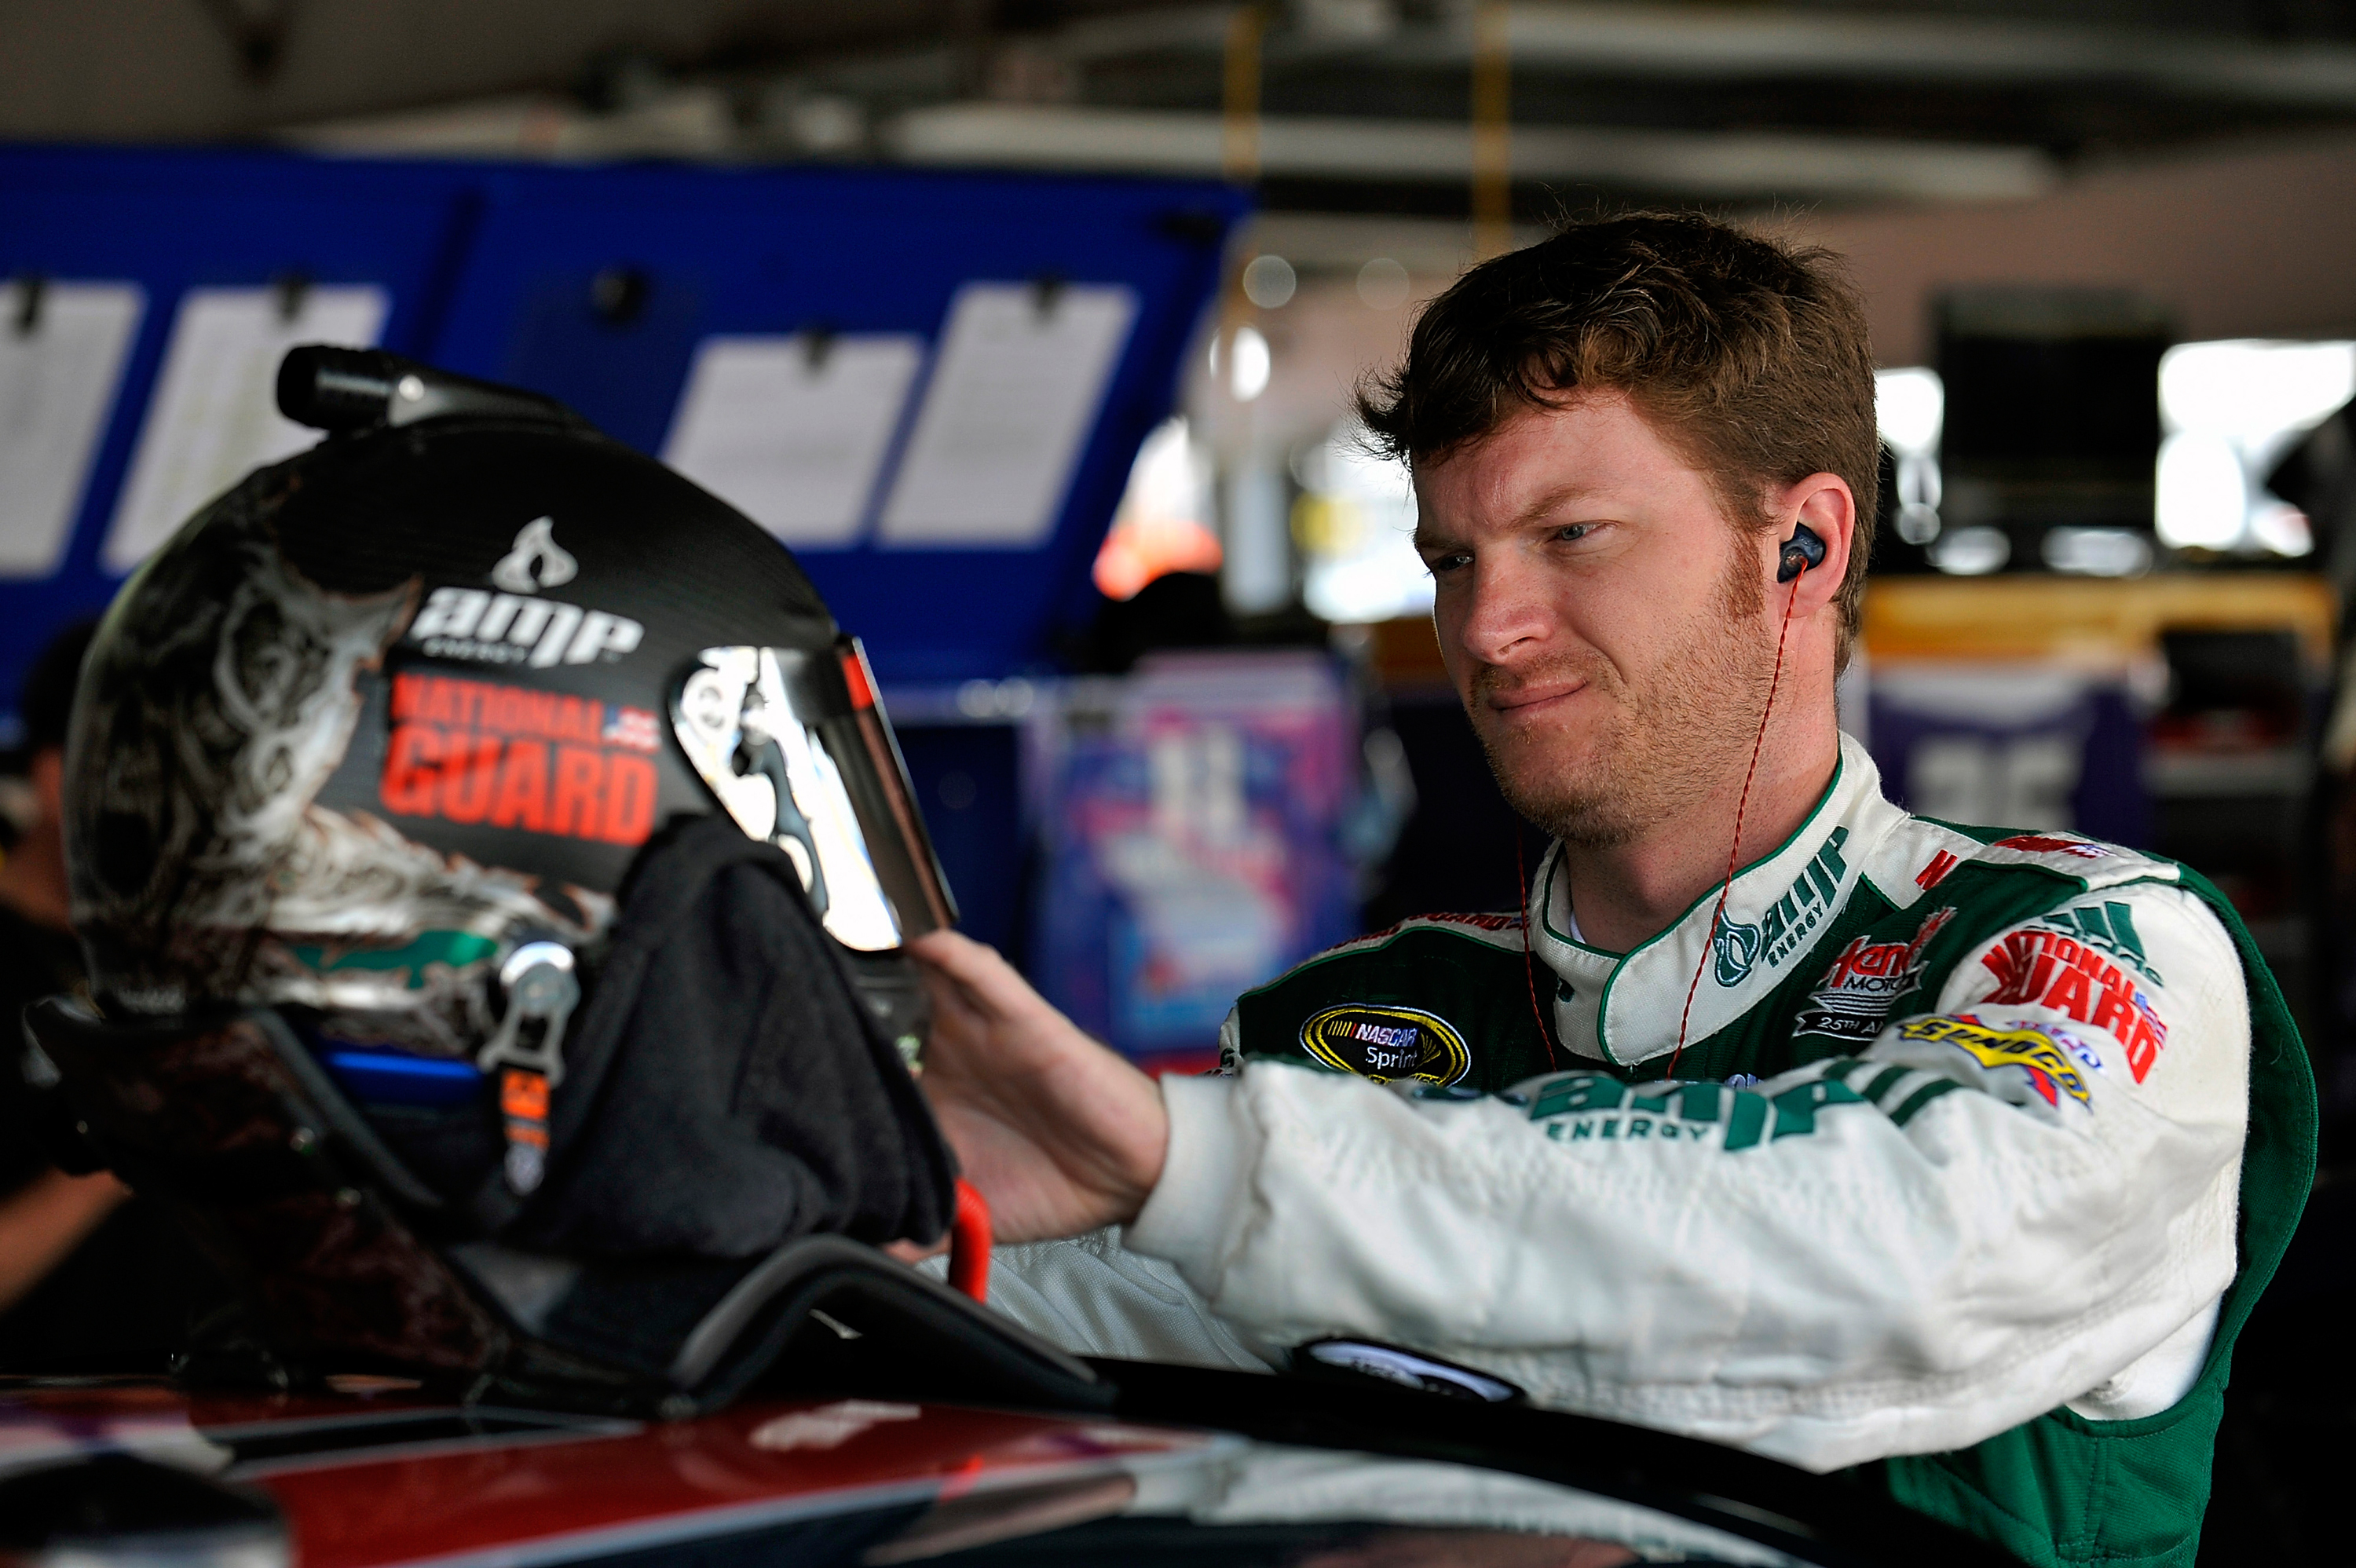 Dale Earnhardt Jr., driver of the No. 88 AMP Energy/National Guard Chevrolet, finished 12th at Dover (Del.) International Speedway and improved to 18th in the driver standings. (Courtesy Hendrick Motorsports)